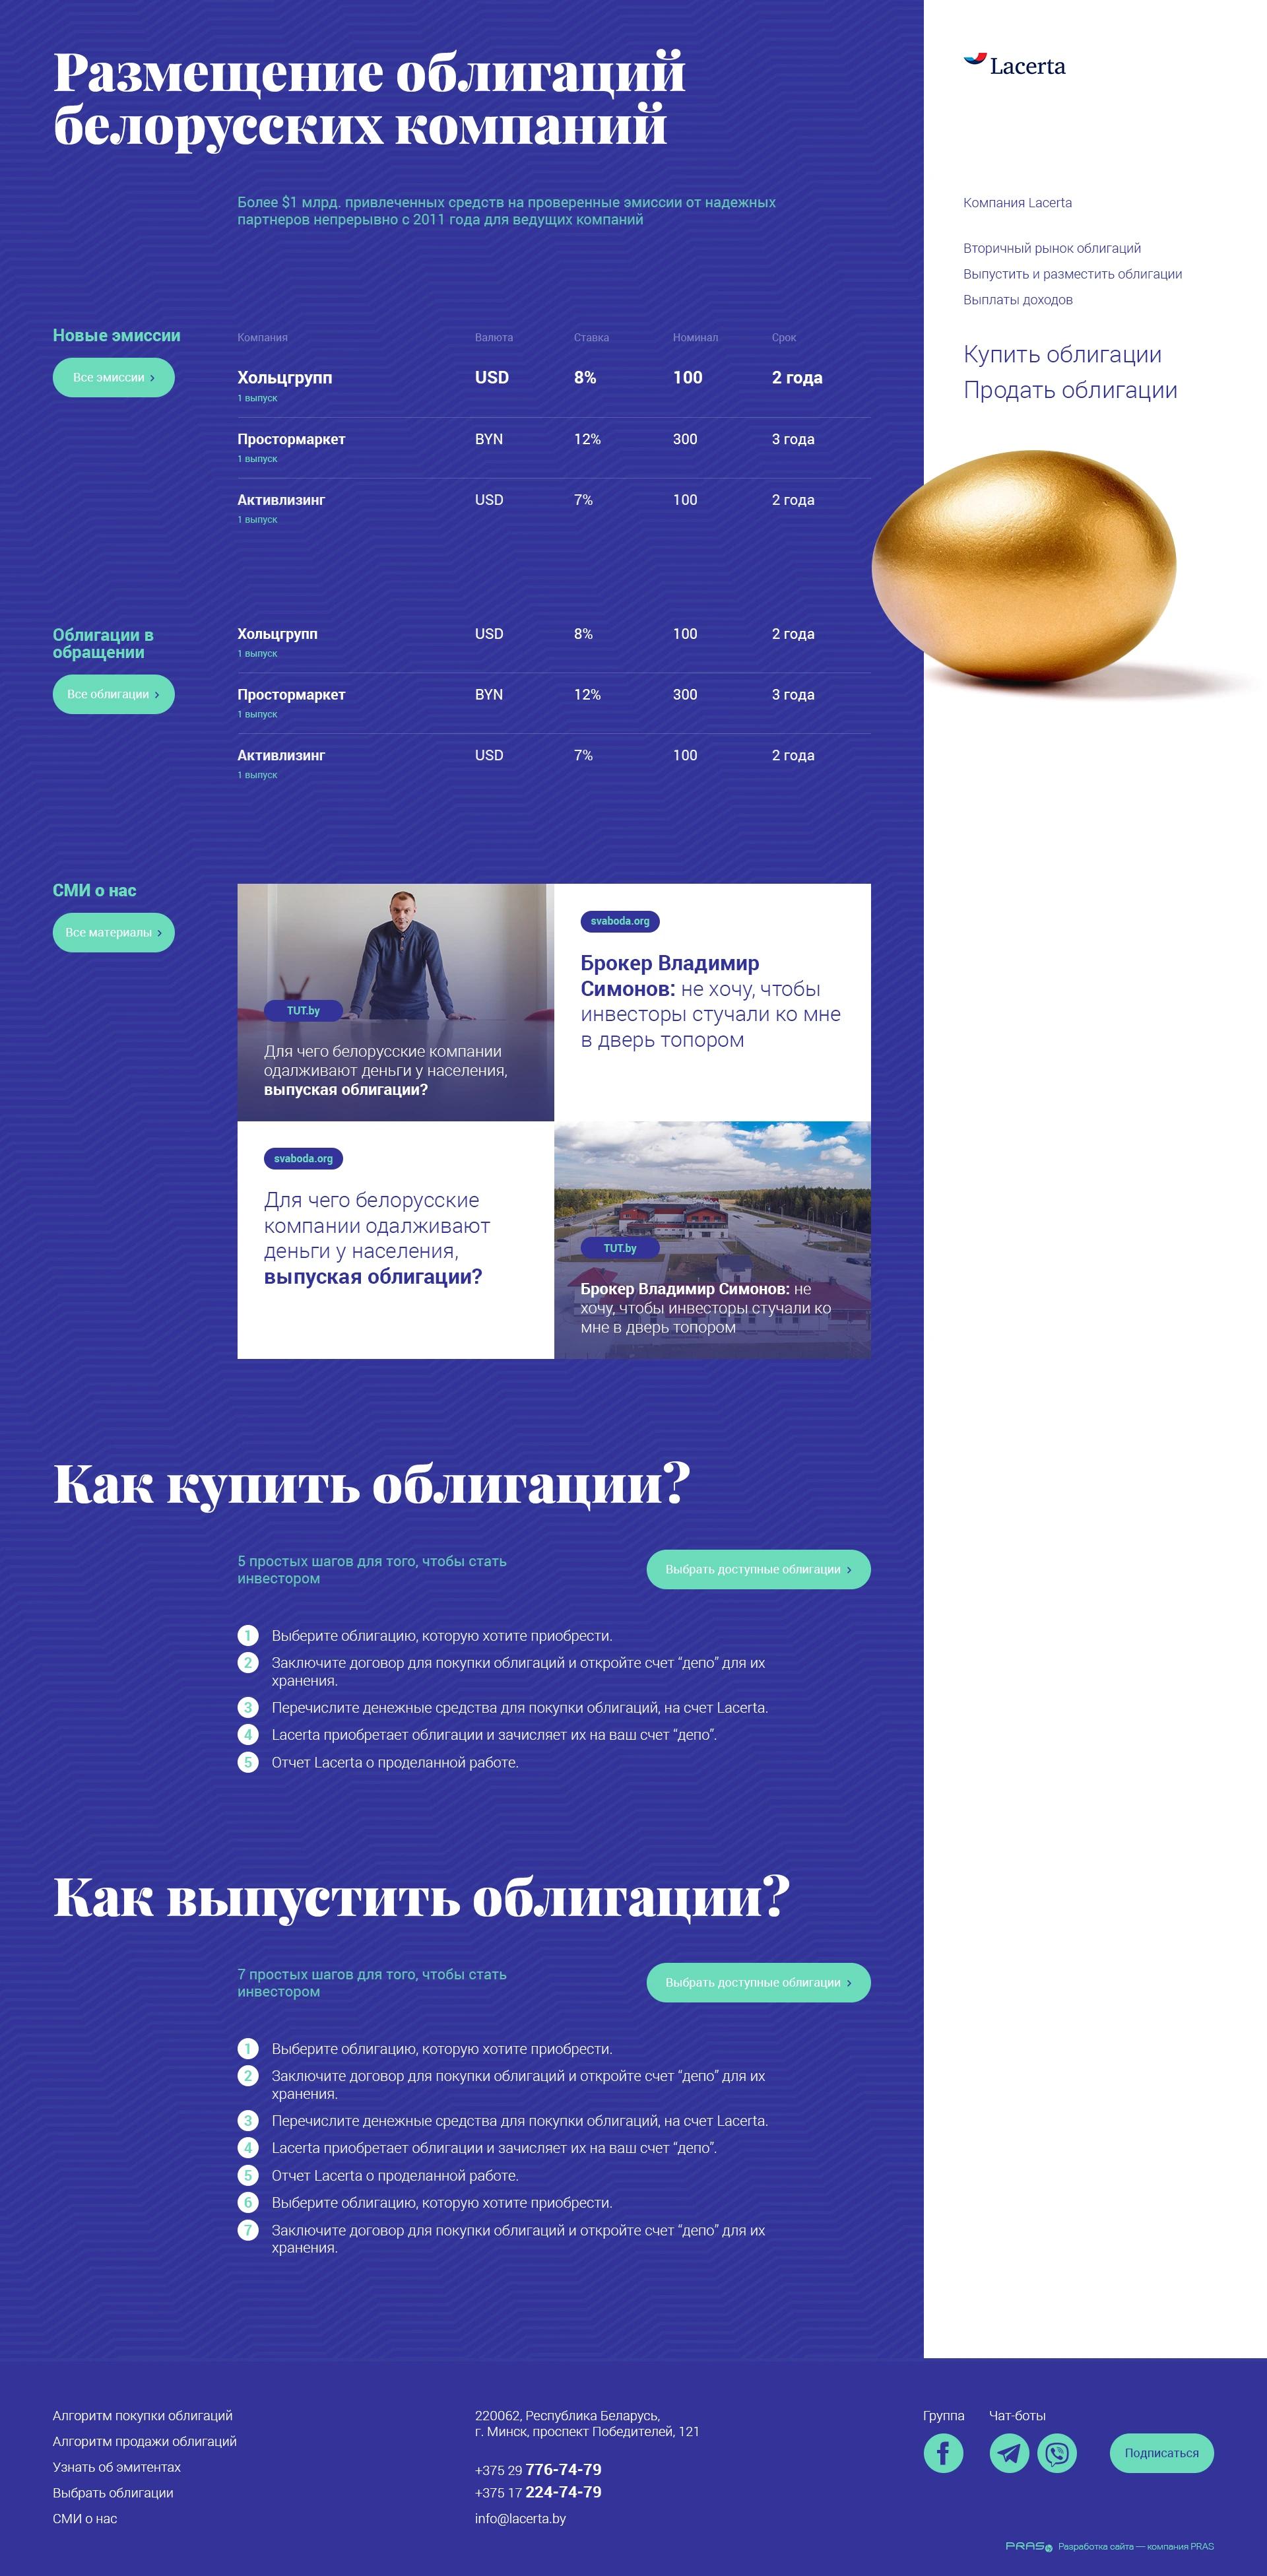 Main page of the project